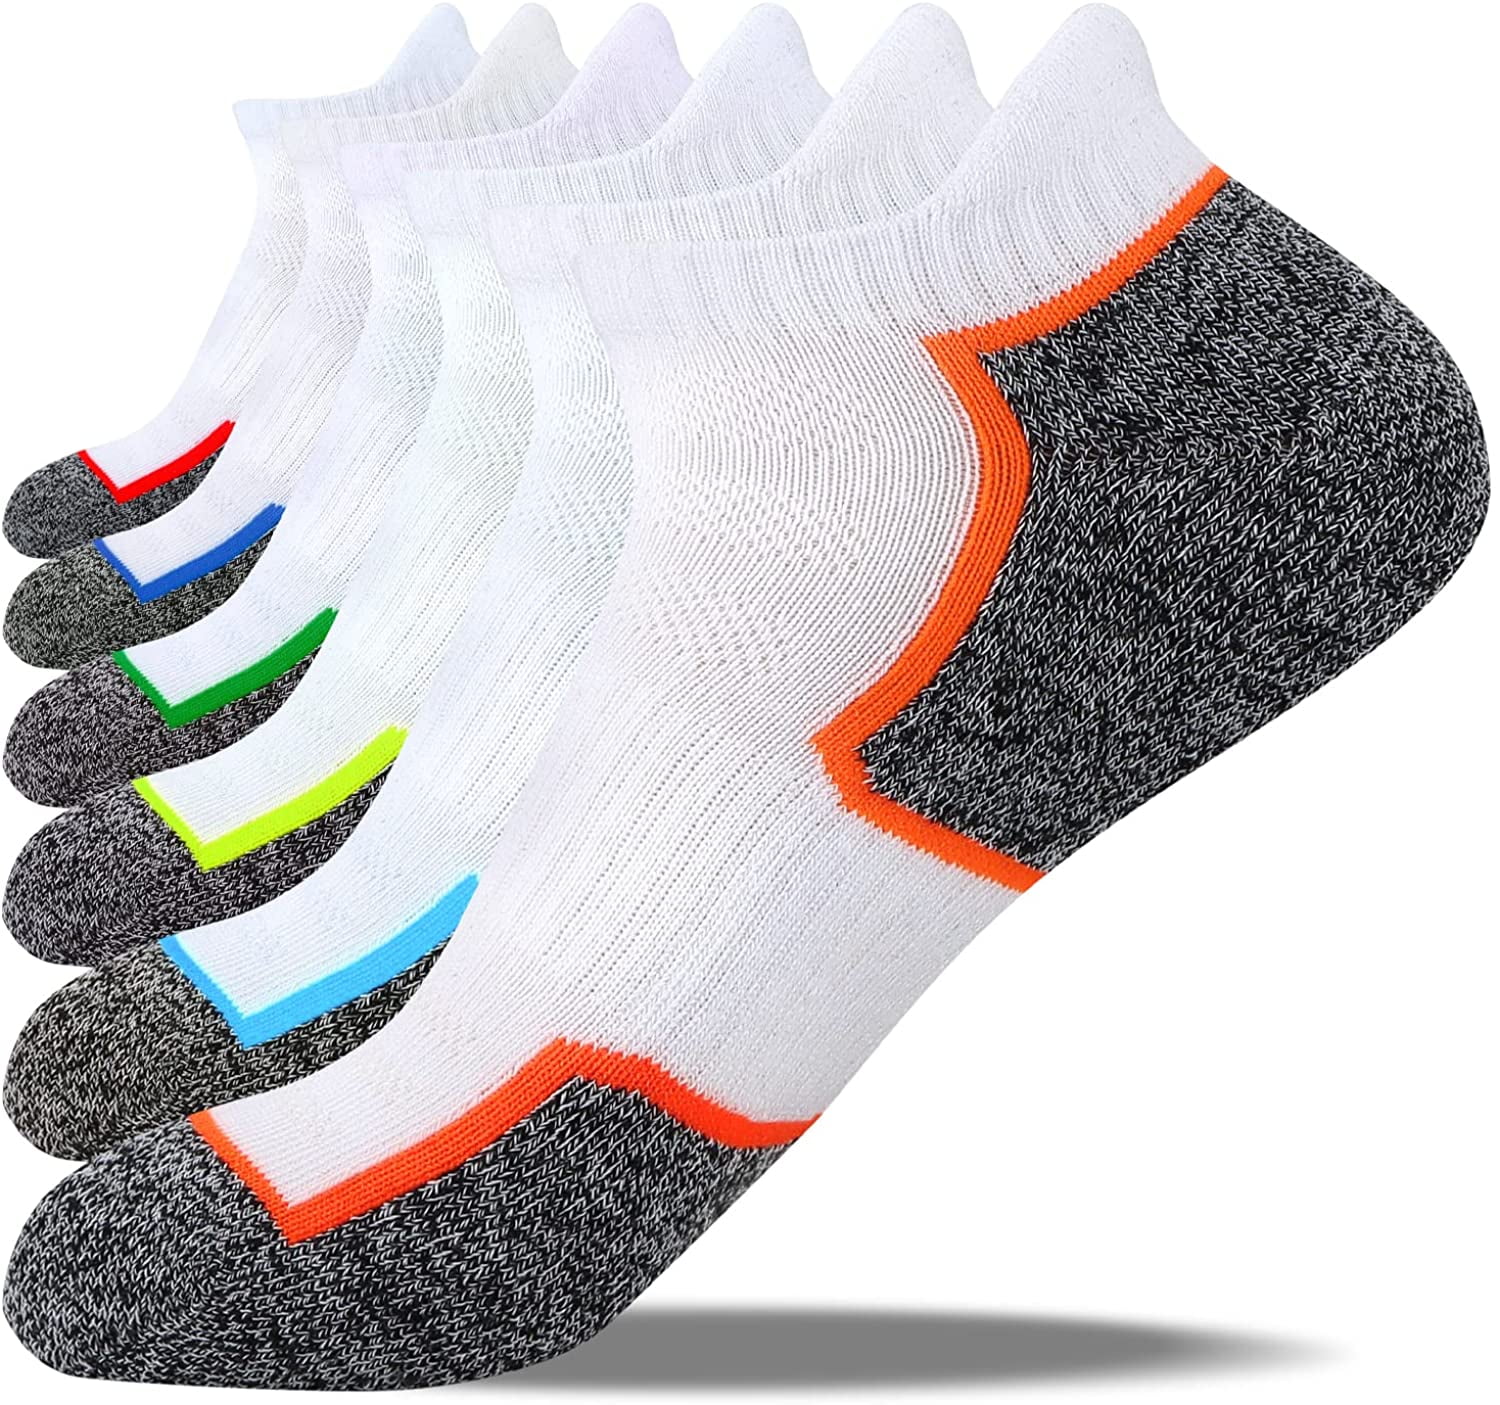 FUNDENCY 6 Pack Men's Ankle Athletic Socks Low Cut Breathable Running ...